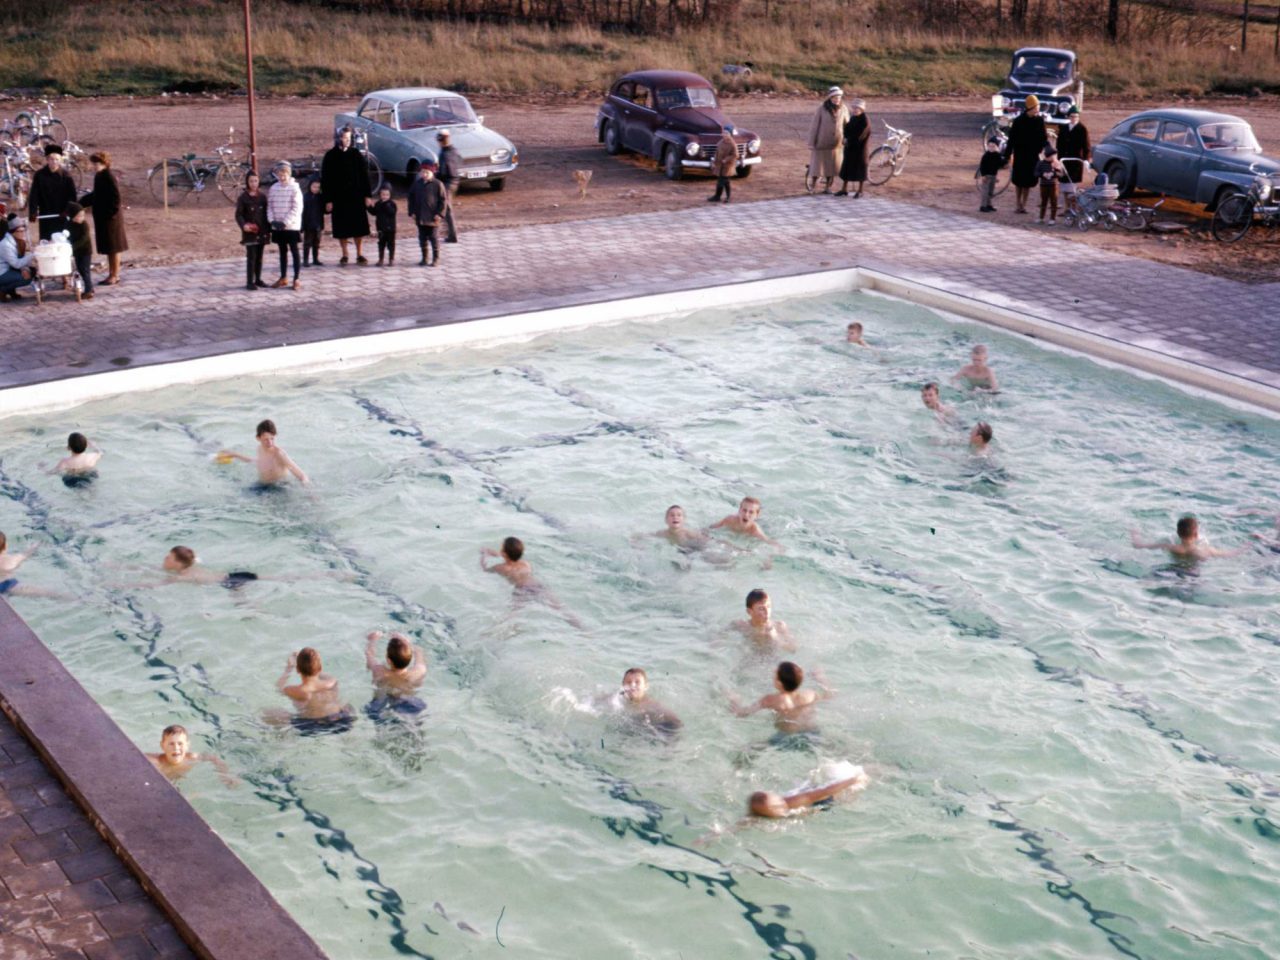 Large pool full of bathing children, people in warm clothing stand on the edge, 1950s cars seen in background.